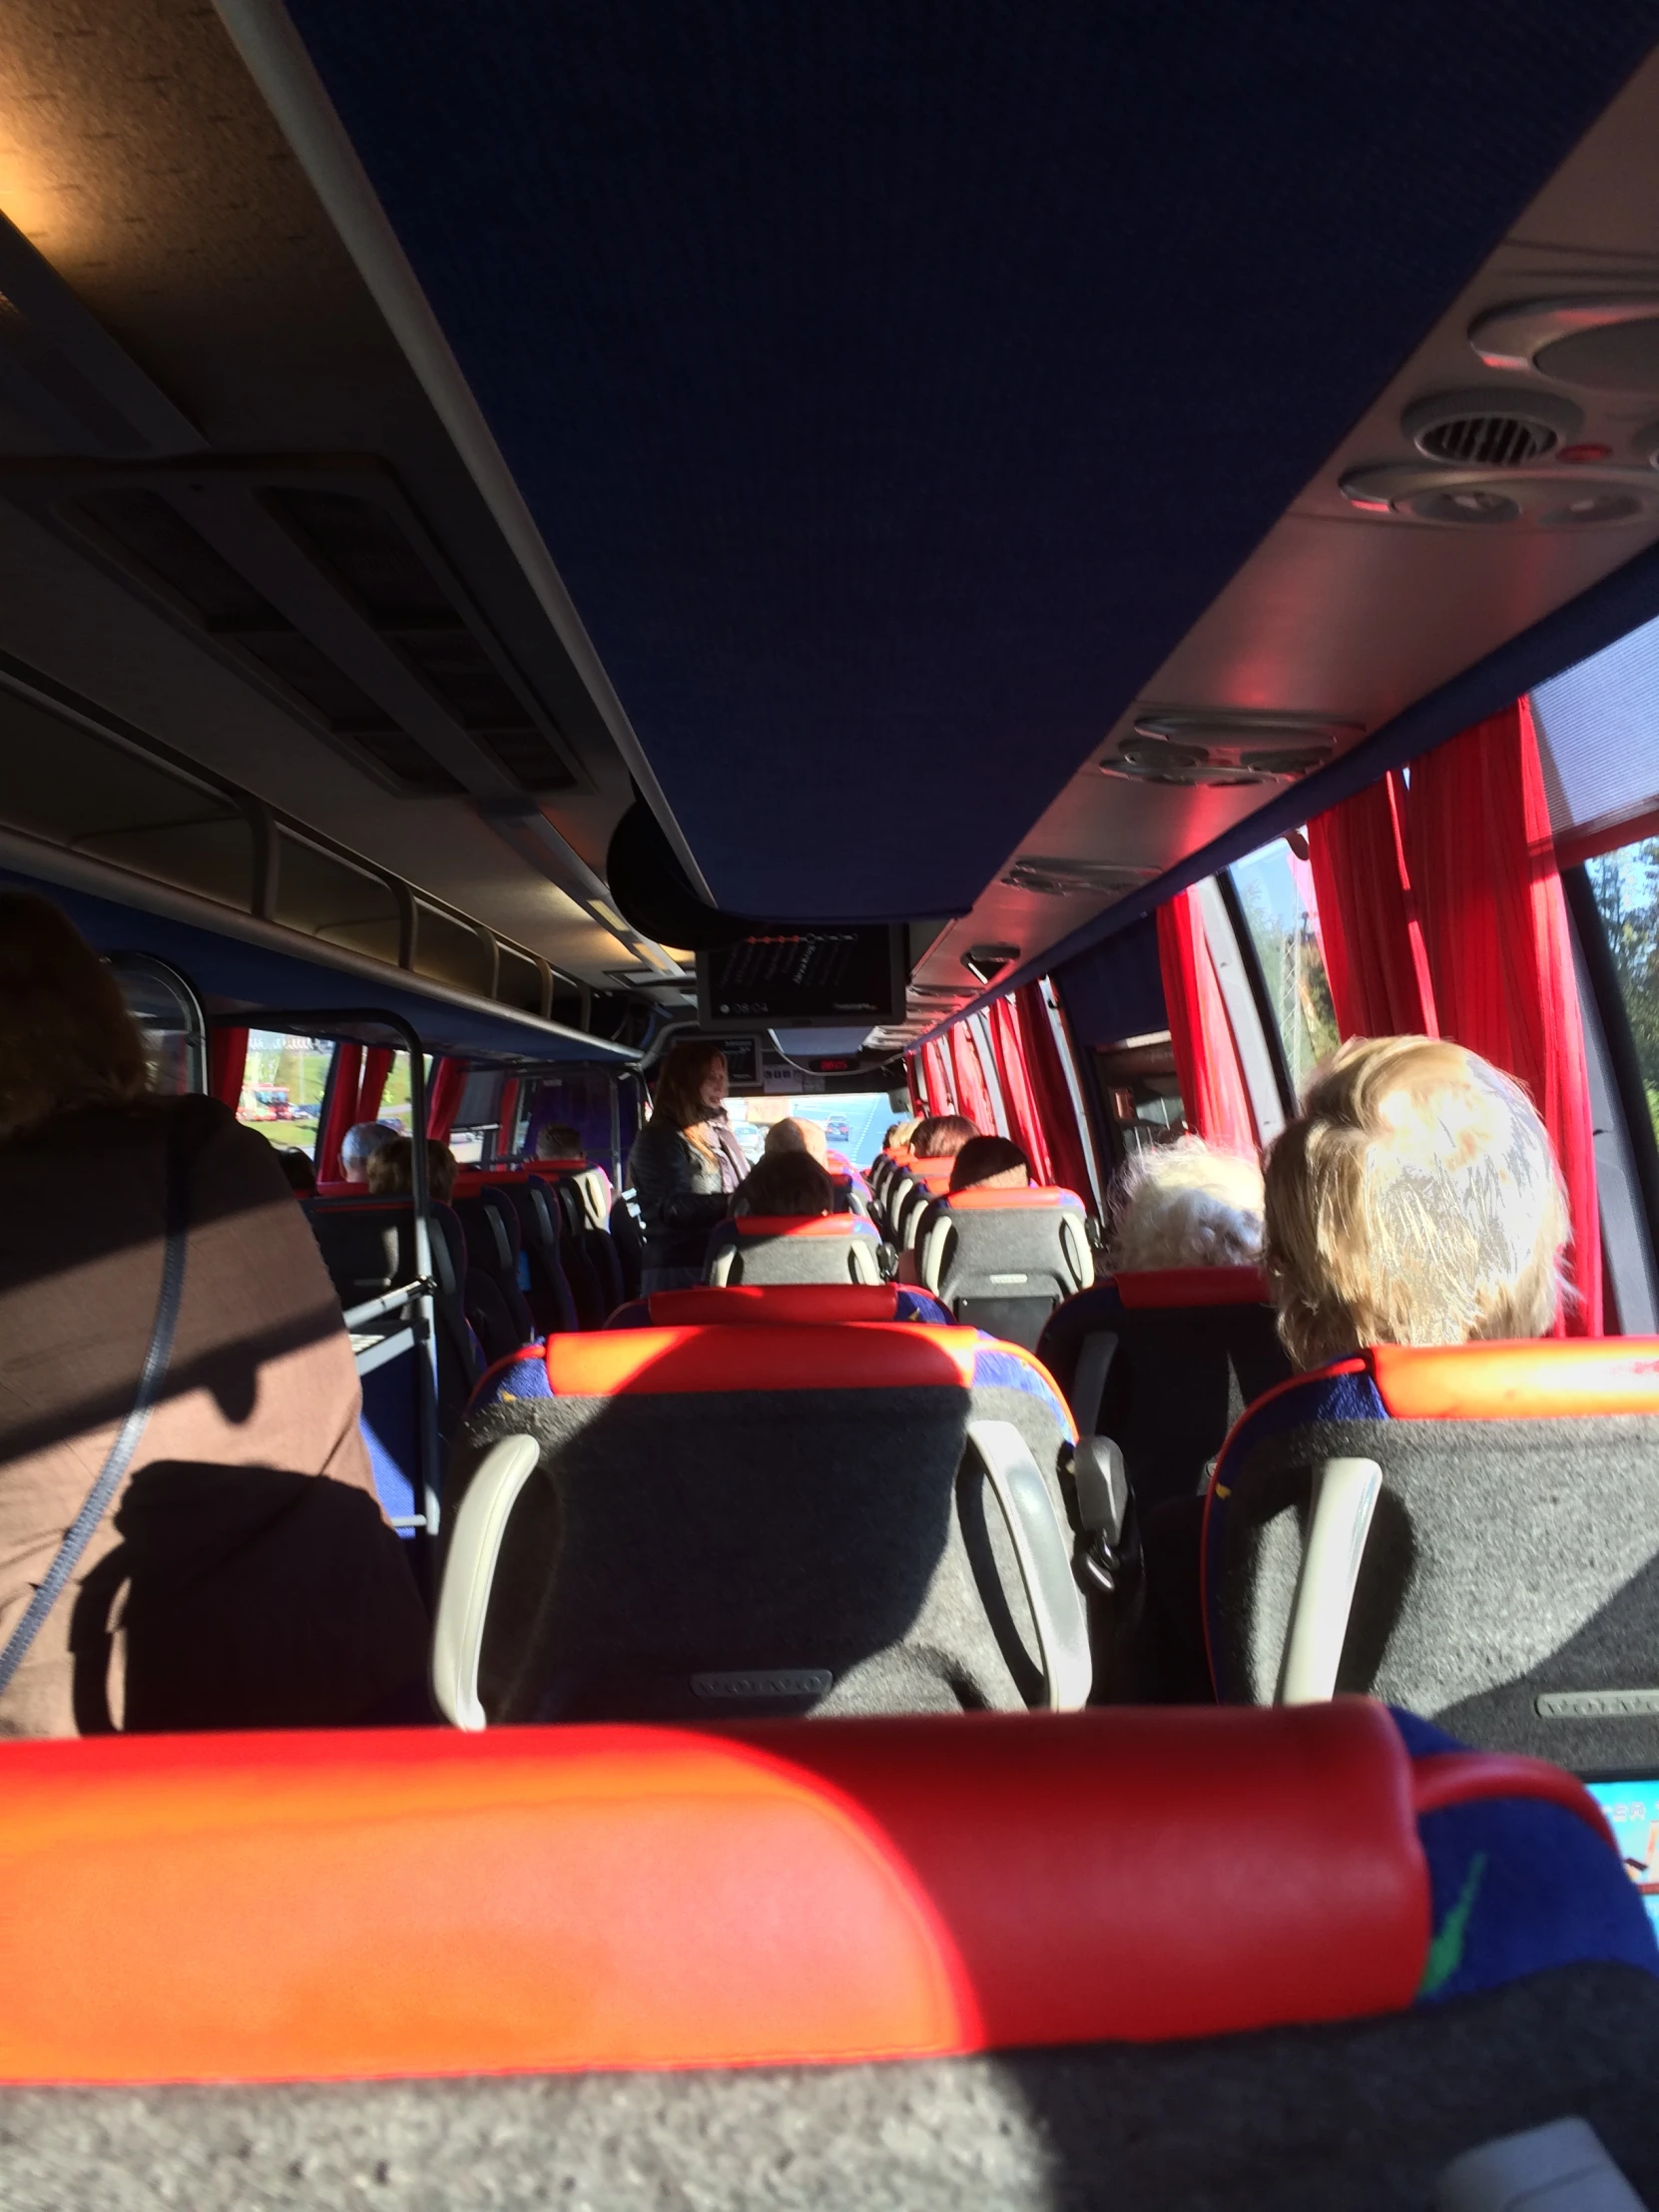 a long bus with the windows covered in red and white